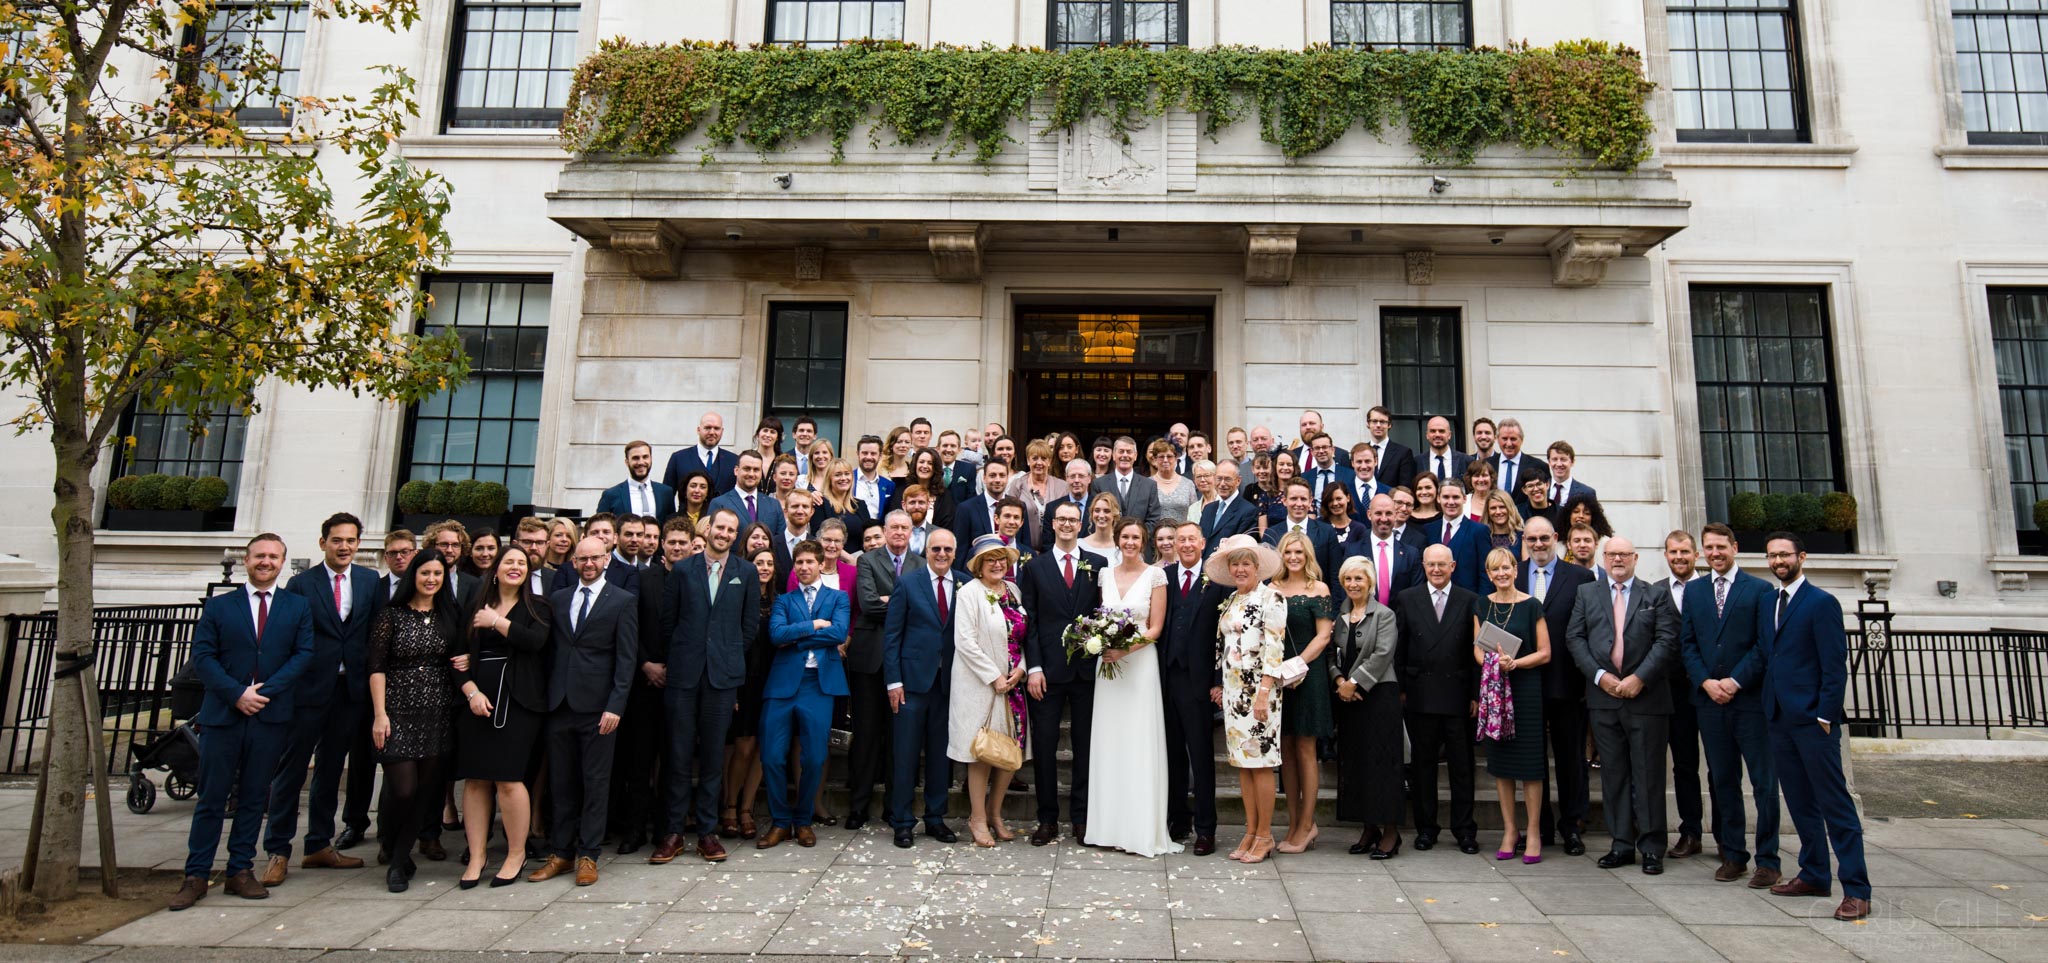 Group Wedding Photo at The Town Hall Hotel